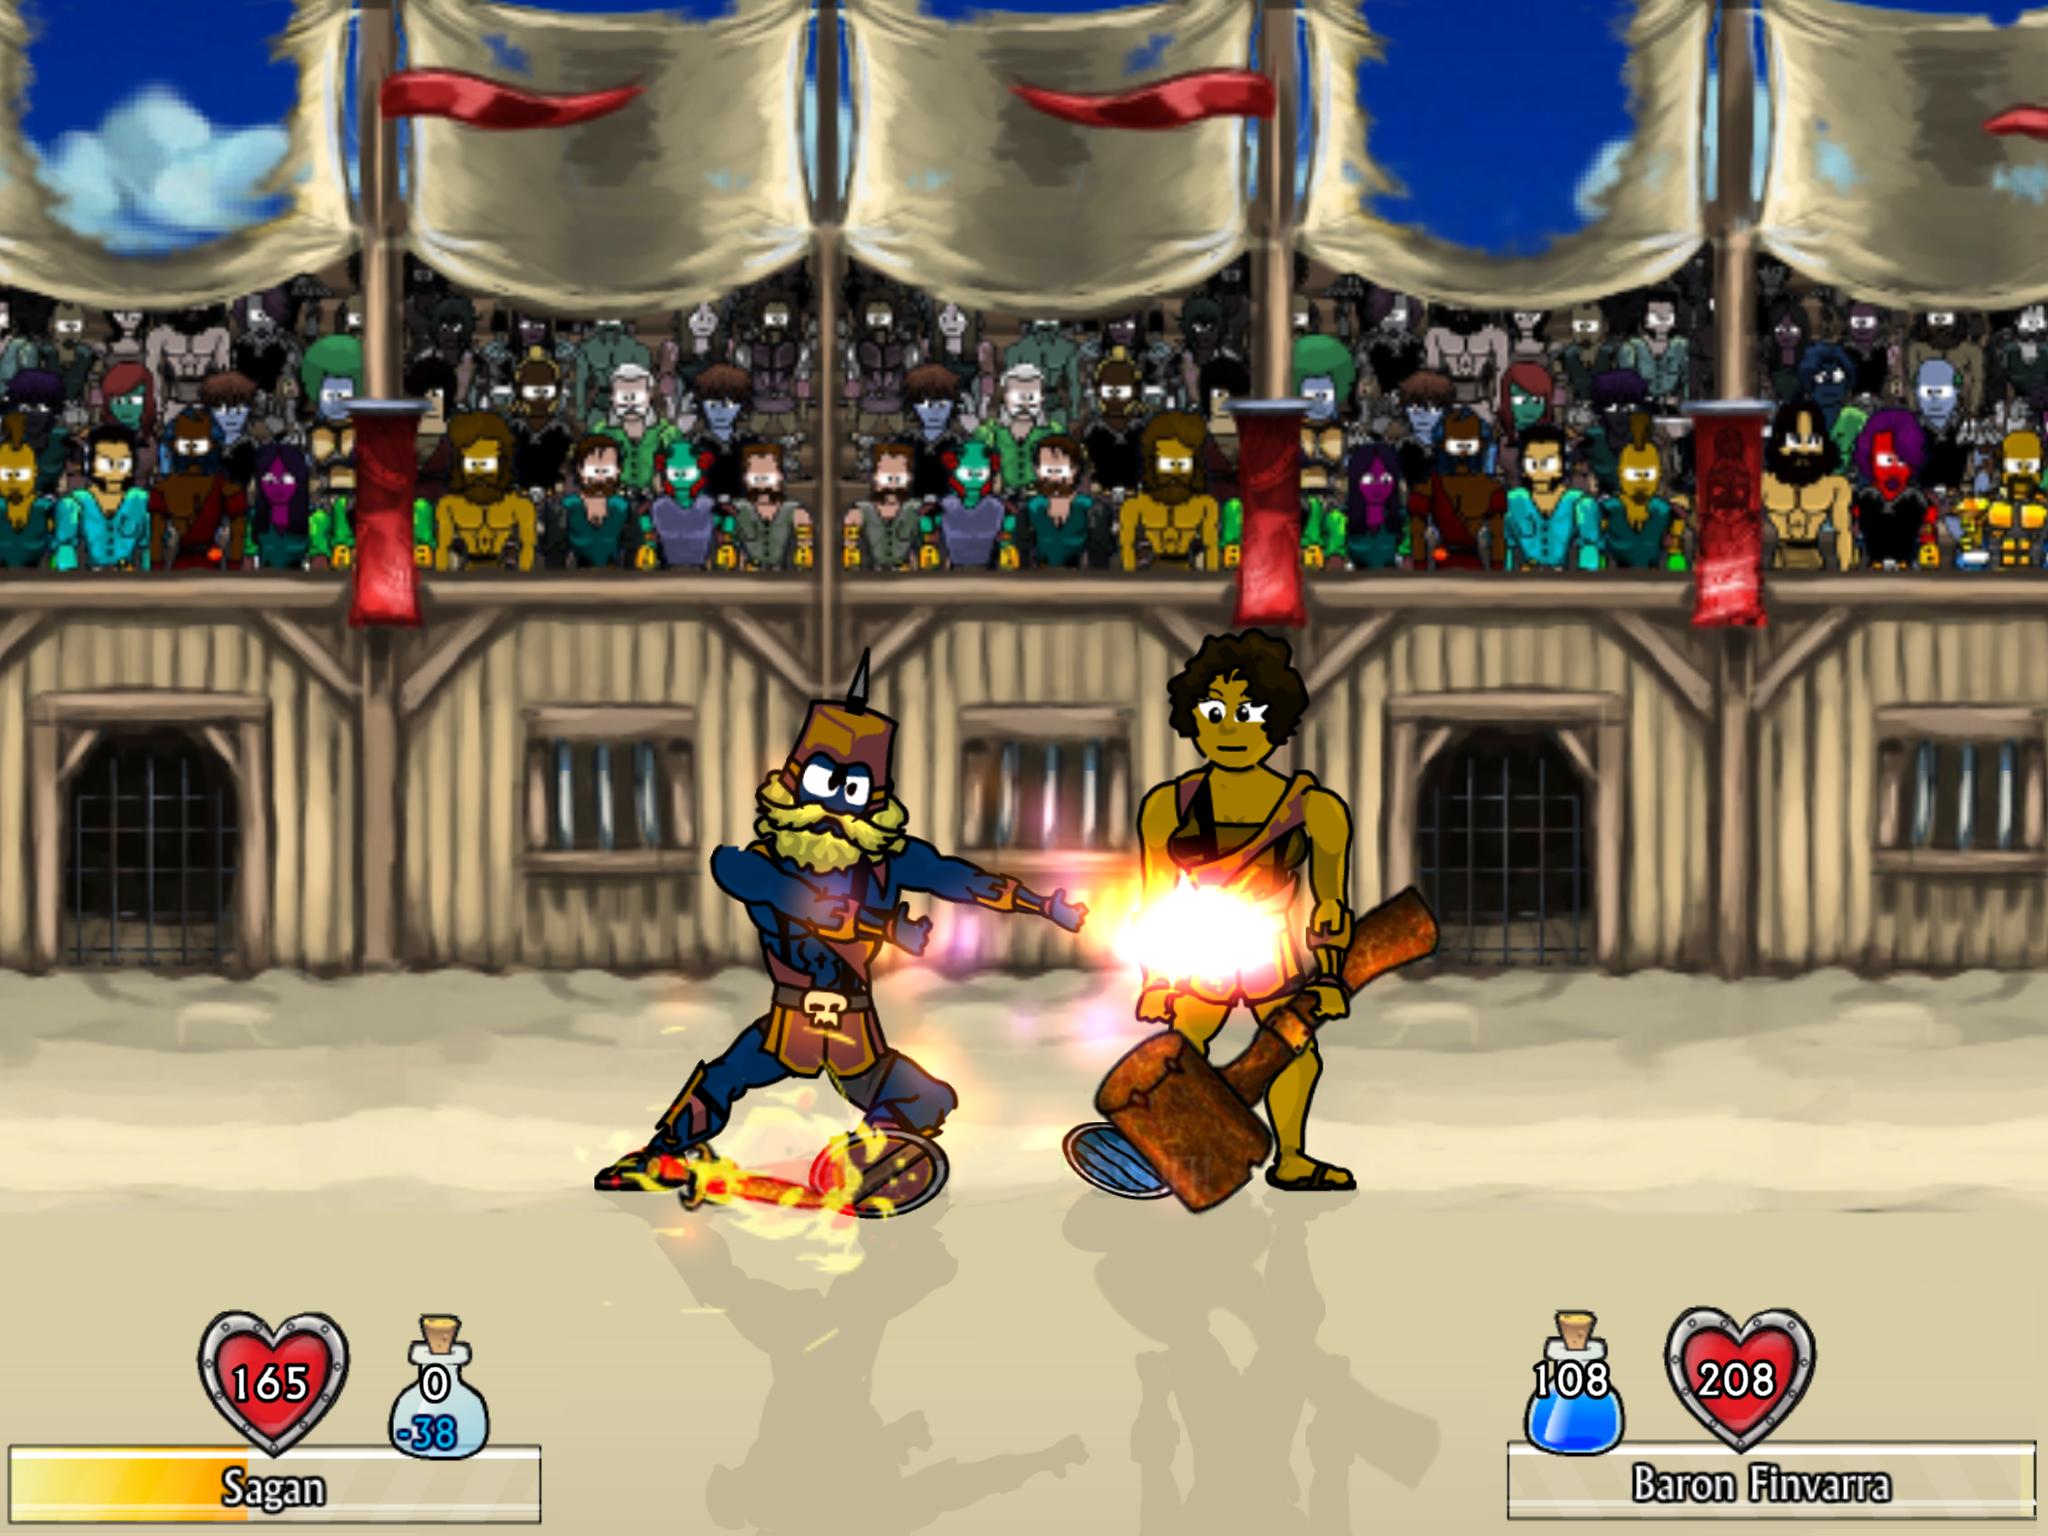 Swords and Sandals 2 Redux for Android - APK Download